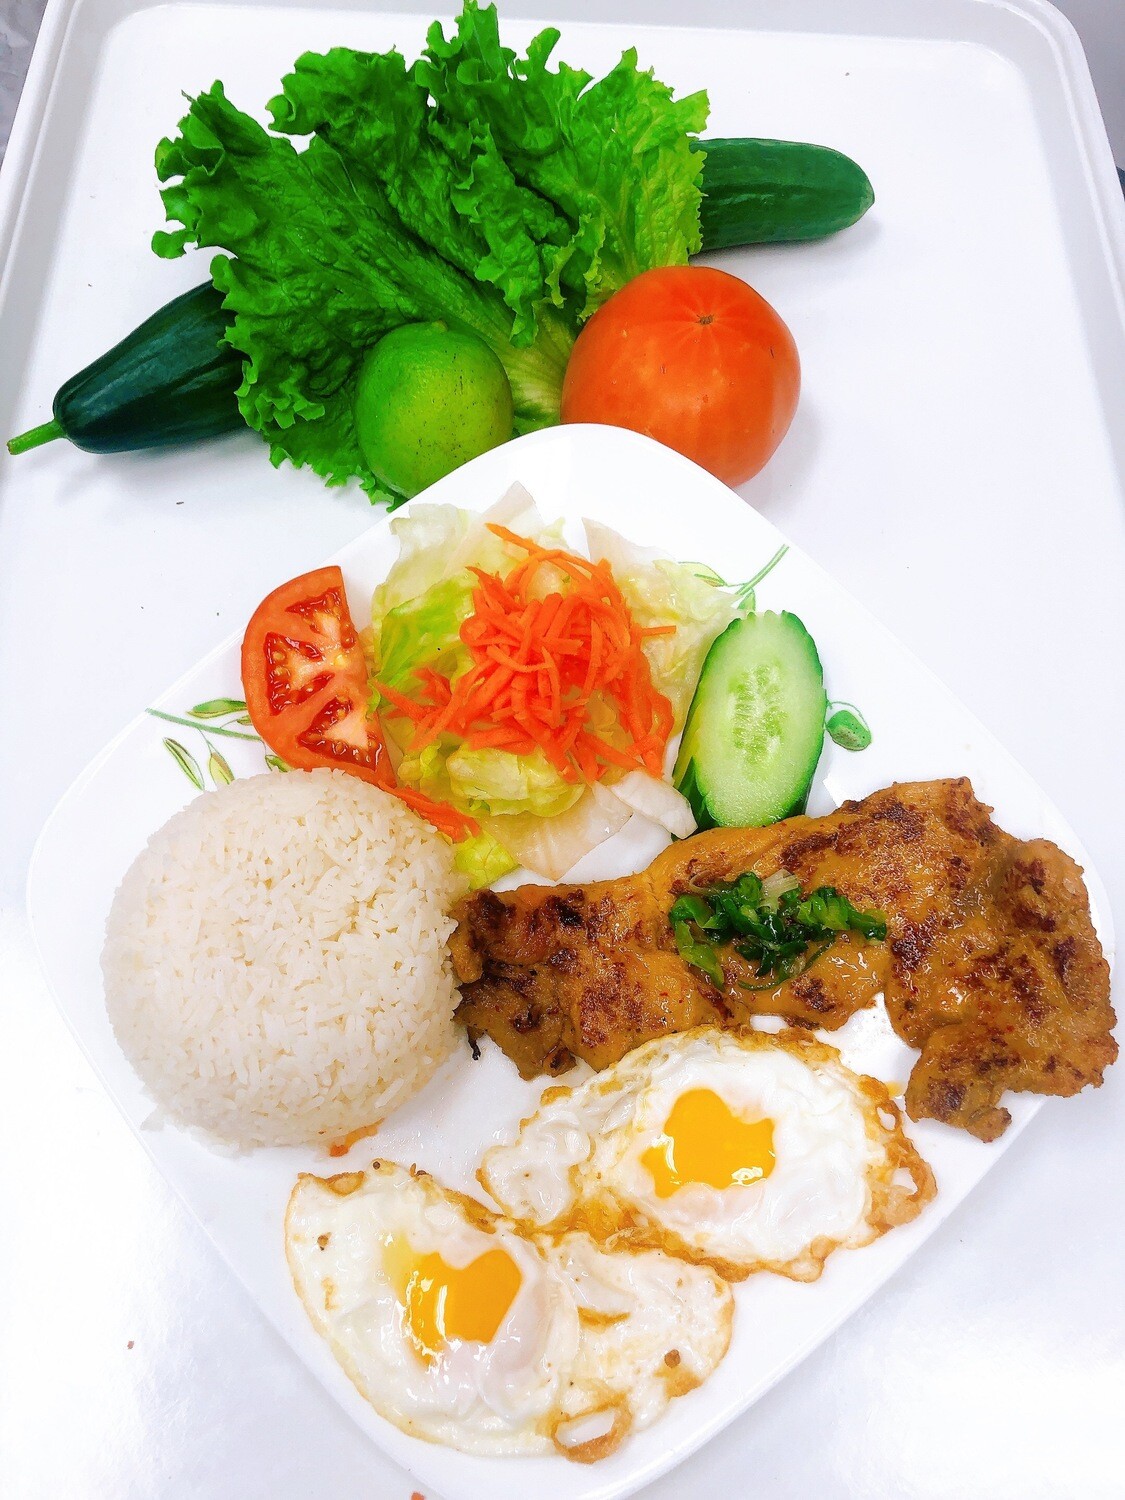 502- Grilled Chicken with Steamed Rice (Plus Two Items)